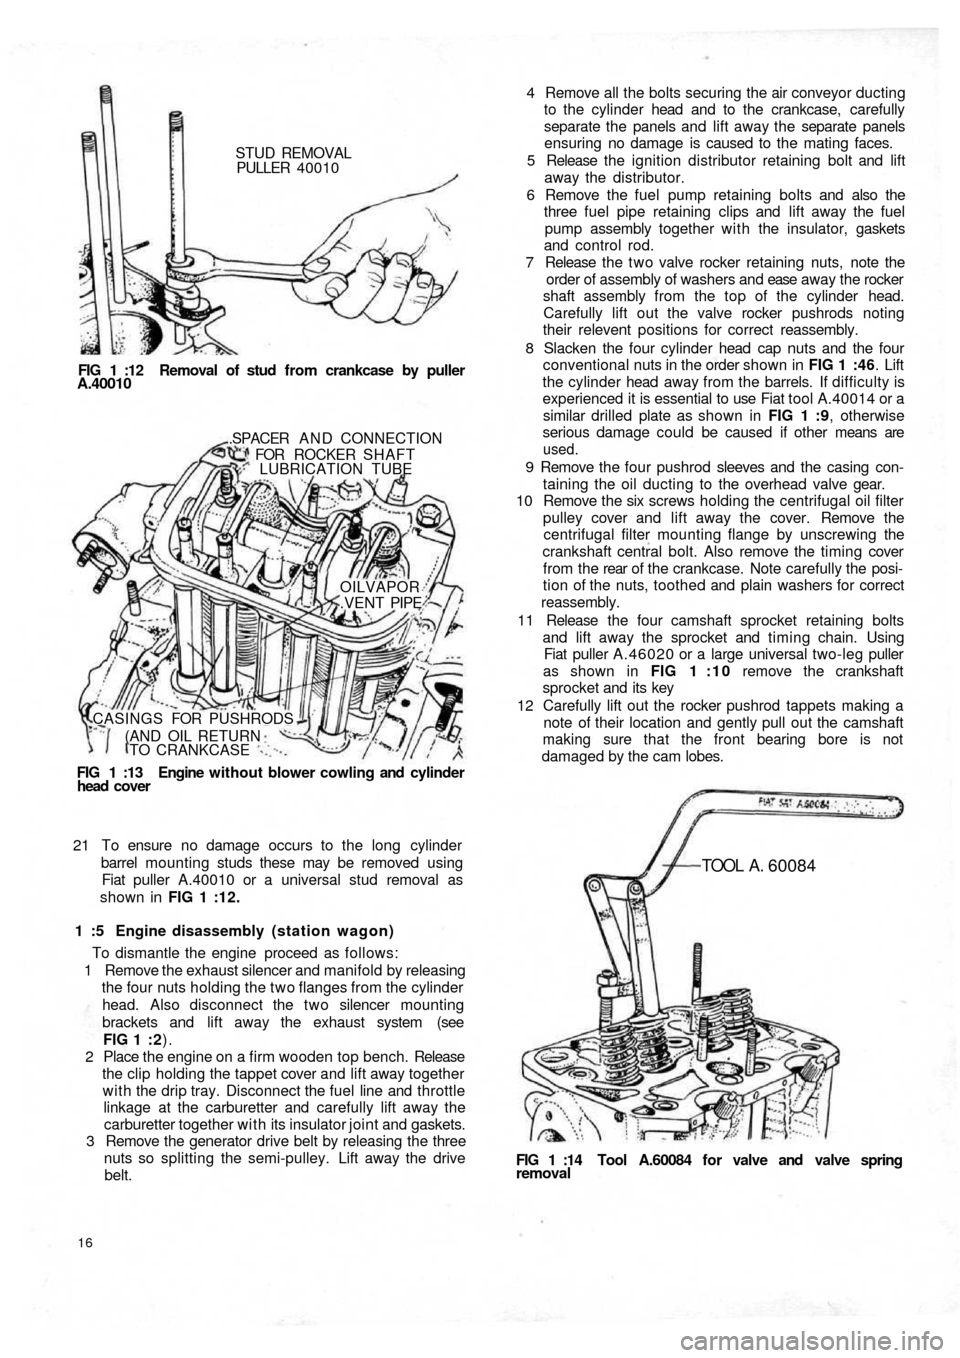 FIAT 500 1970 1.G Workshop Manual STUD REMOVAL
PULLER  40010
FIG 1 :12  Removal of stud from crankcase by puller
A.40010
FIG  1  :13   Engine  without blower cowling and cylinder
head  cover.SPACER  A N D  CONNECTION
FOR ROCKER SHAFT
